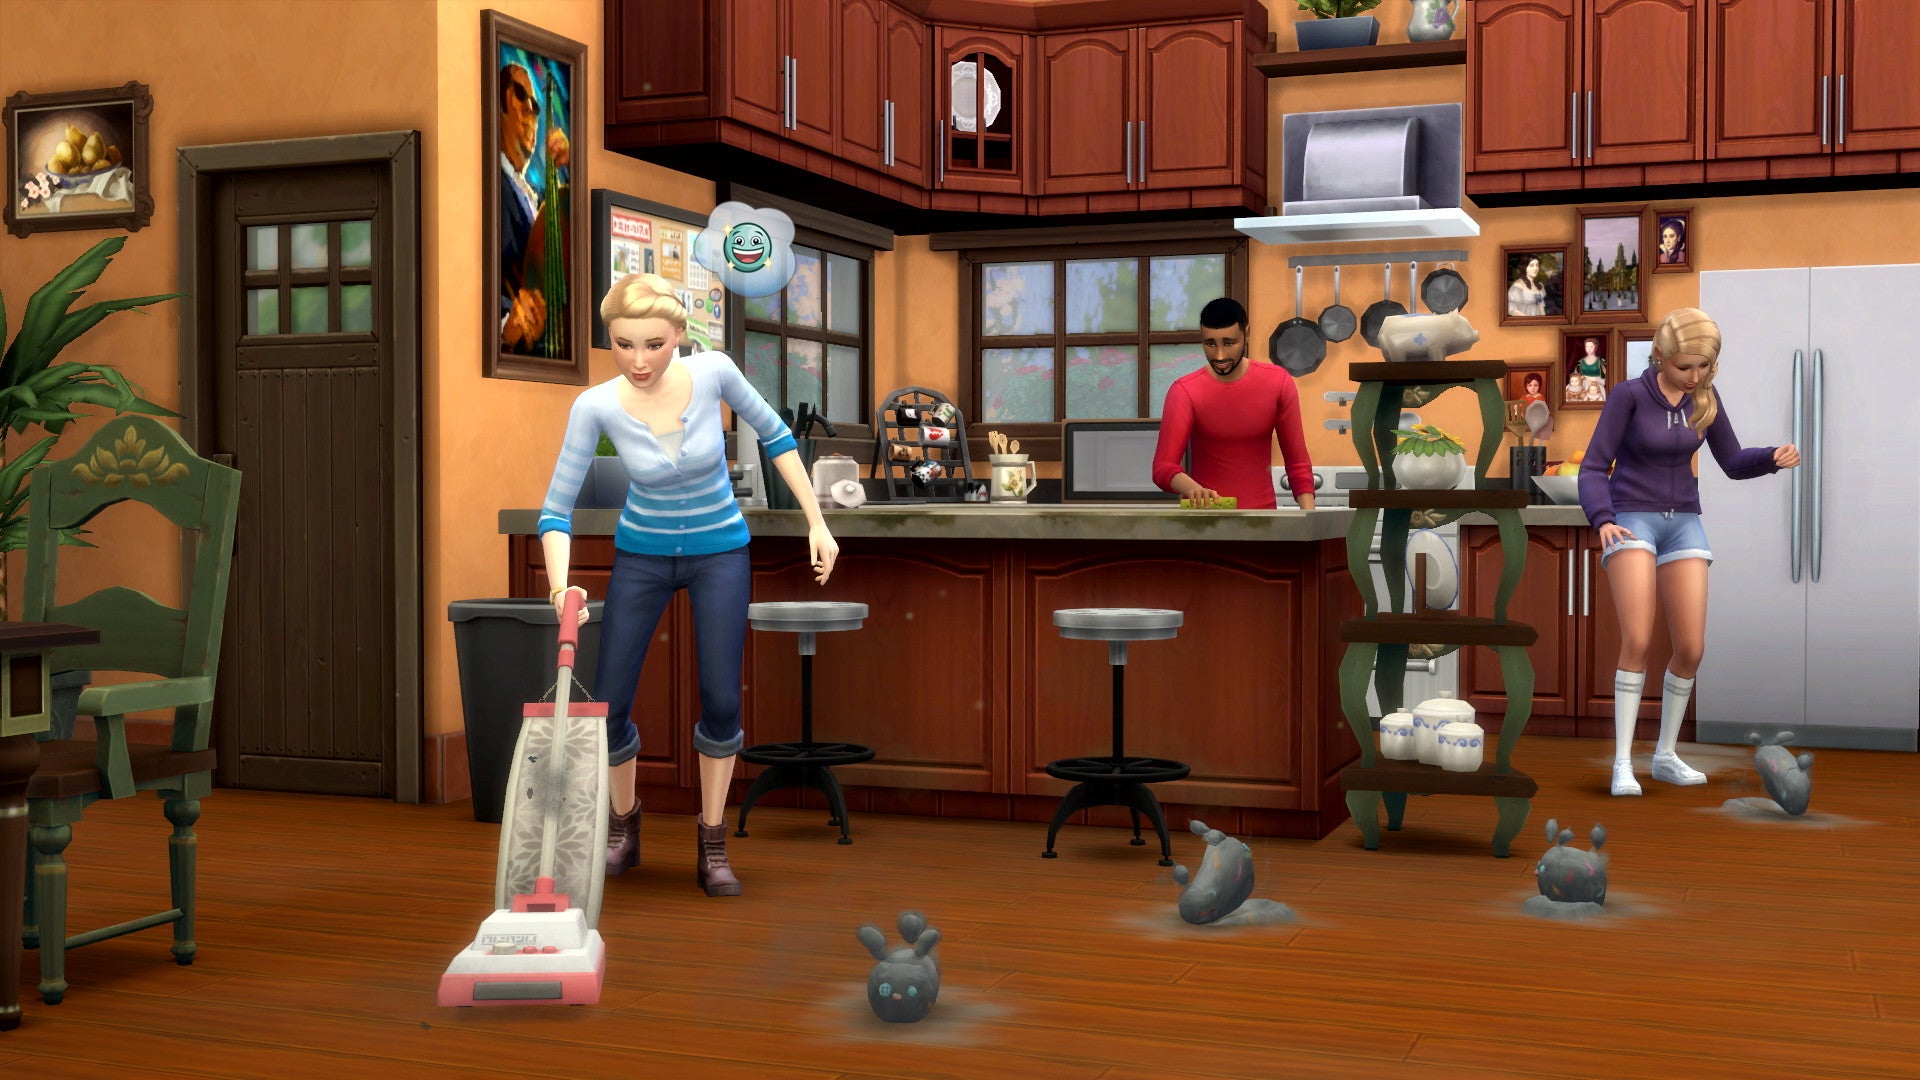 The Sims 4 now has Kits, a new way to buy DLC packs